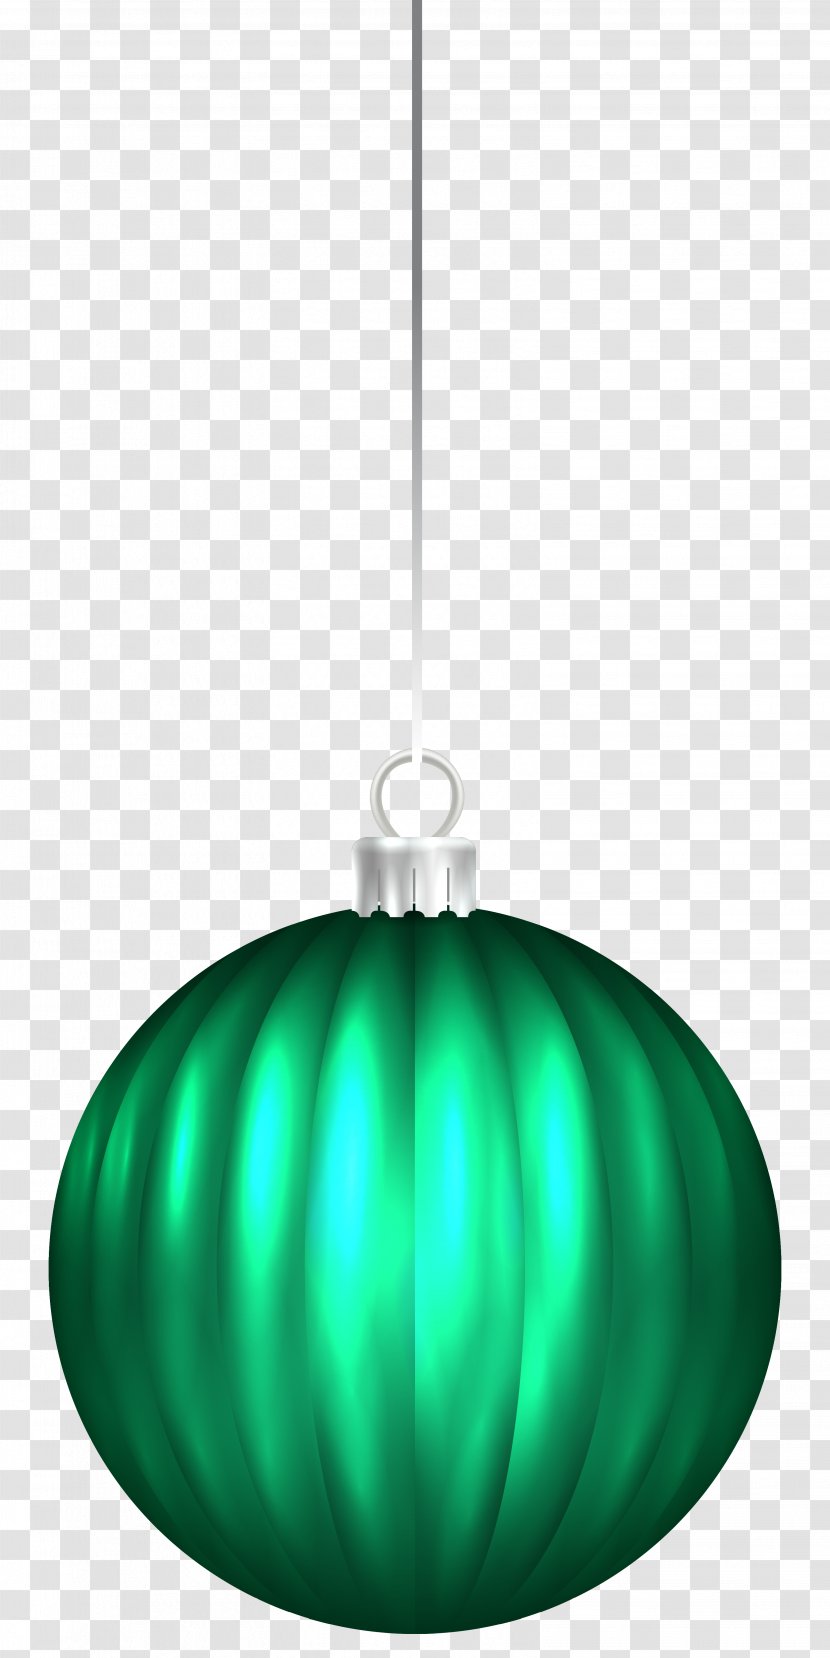 Lighting Green Christmas Ornament Illustration - Turquoise - Ball Clip Art Image Transparent PNG